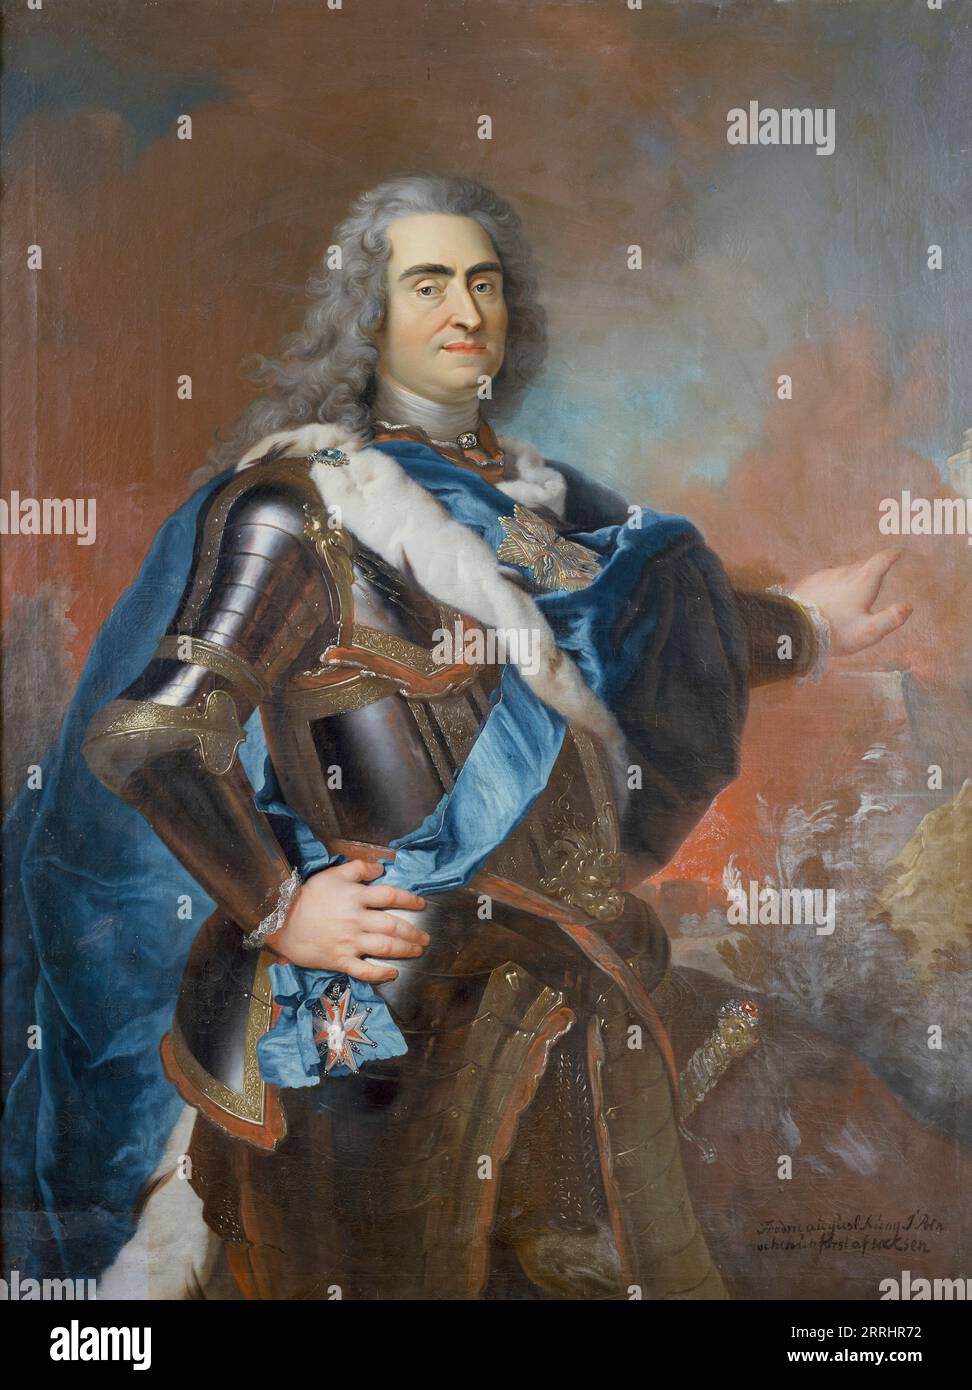 August II the Strong, 1670-1733, elector of Saxony, king of Poland, late 17th-mid 18th century. Stock Photo